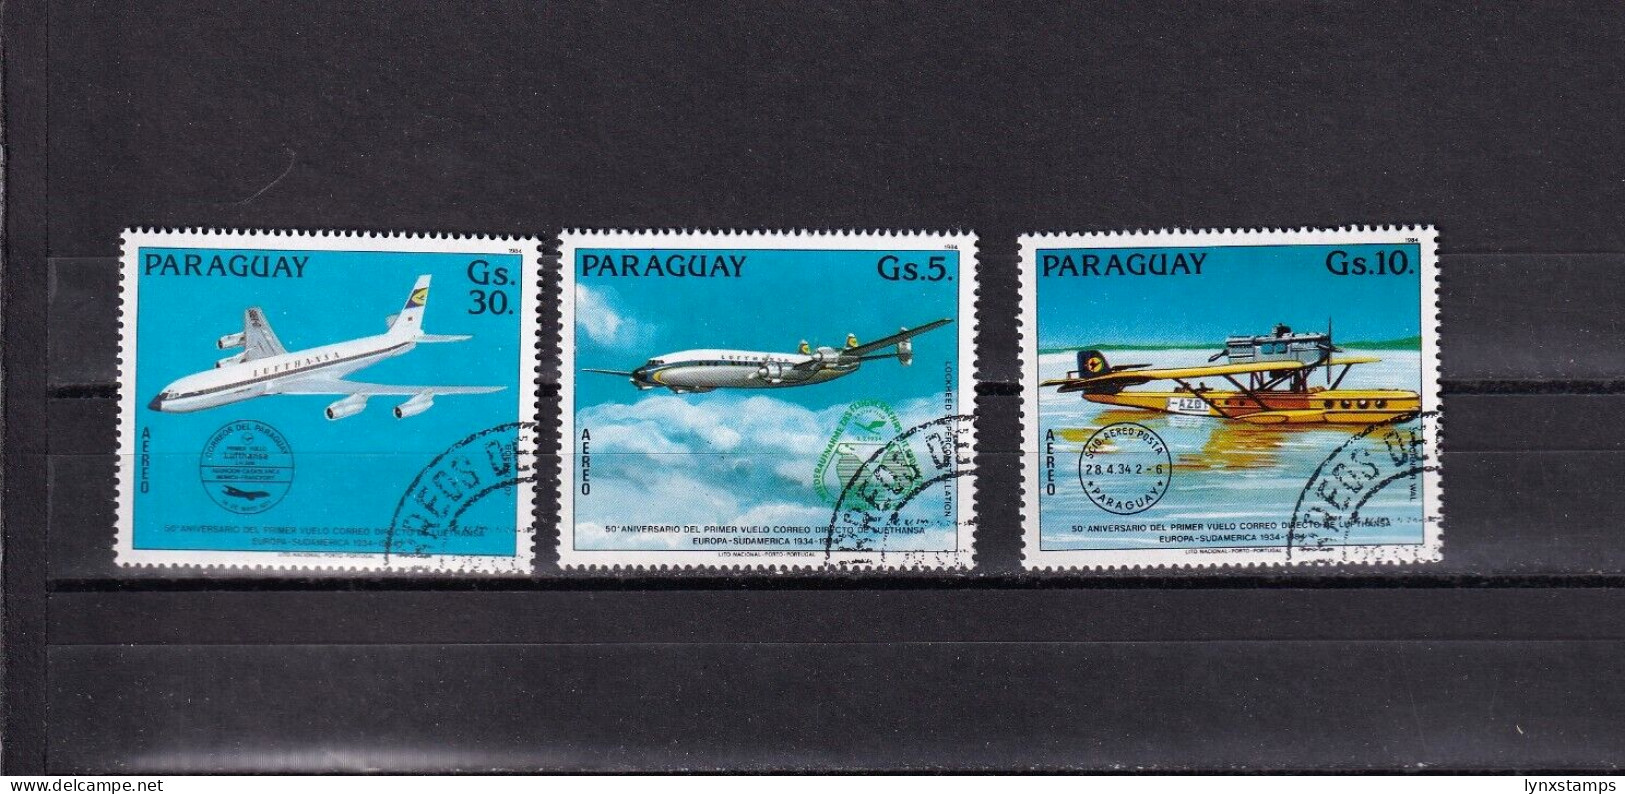 SA03 Paraguay 1984 Airmail 50th Anniv First Flight Europe To South America Used - Paraguay